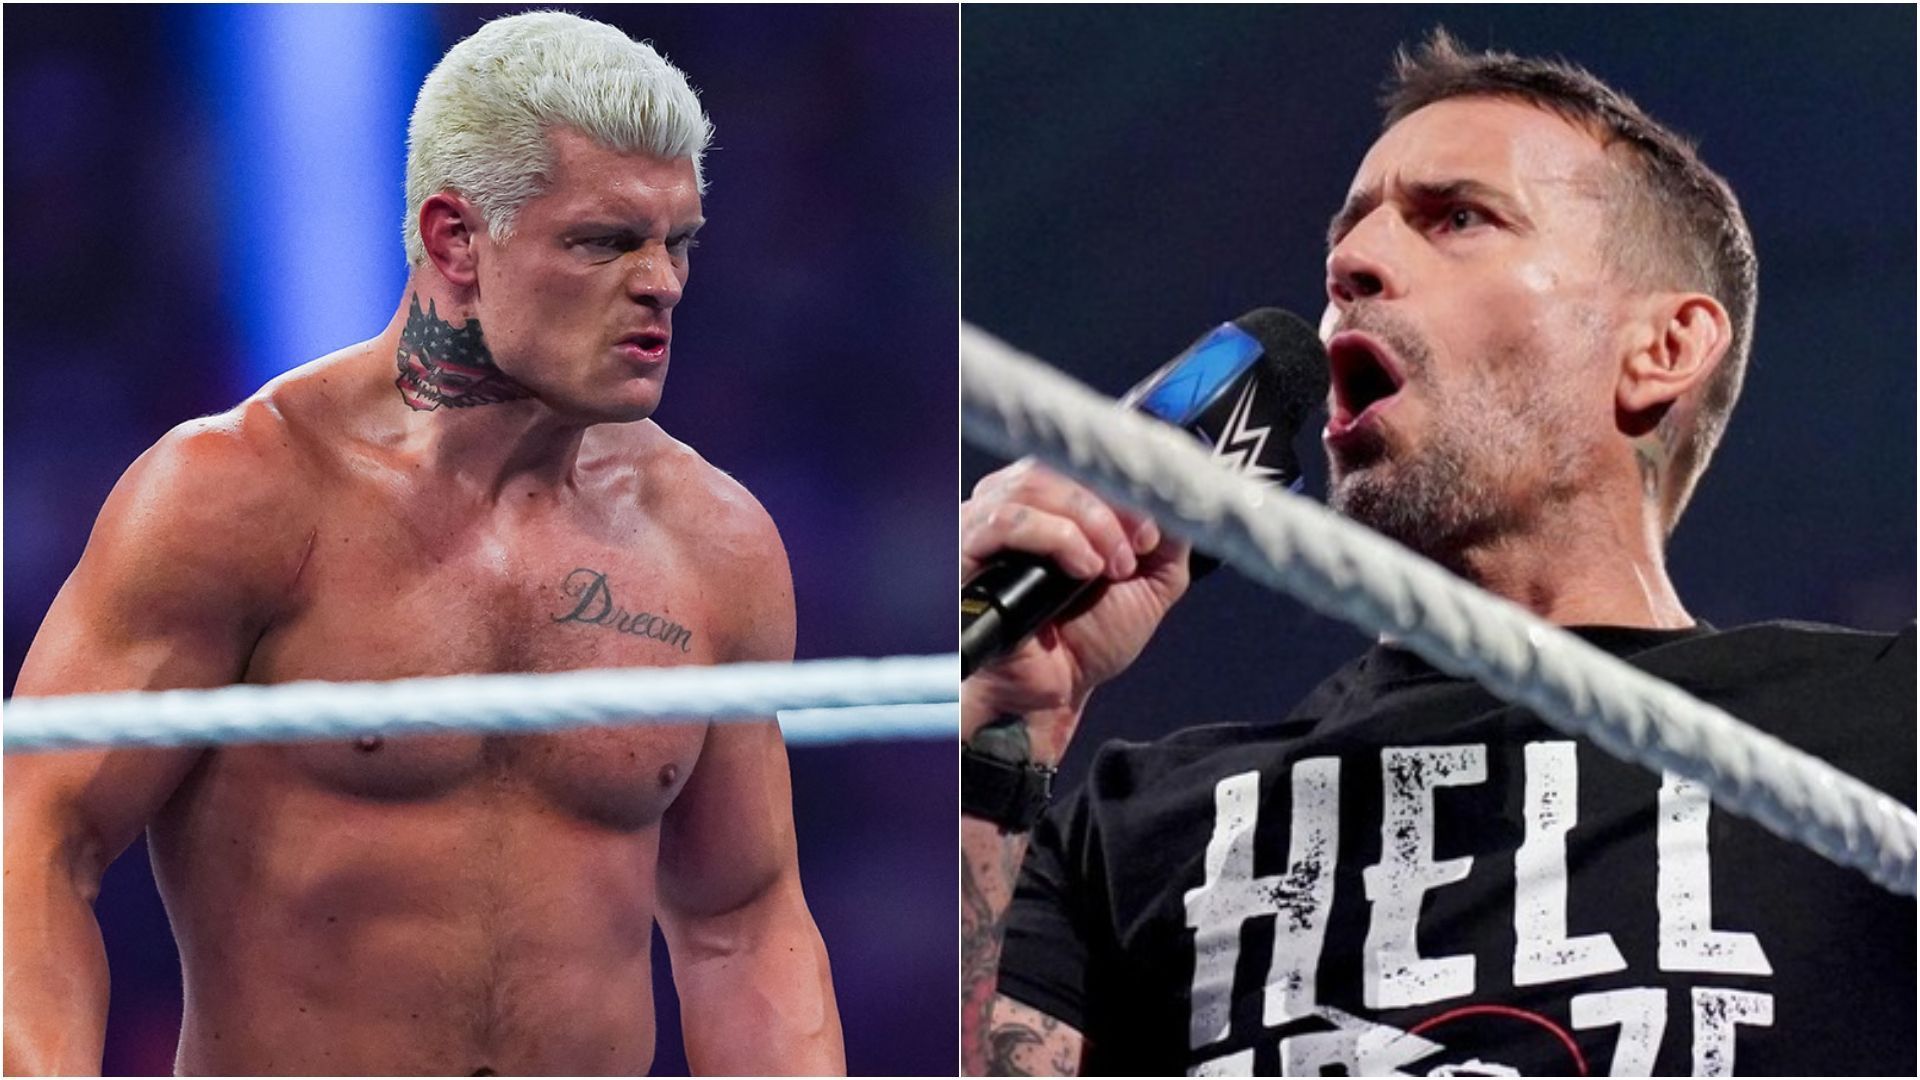 CM Punk and Cody Rhodes are two of the hottest superstars in WWE